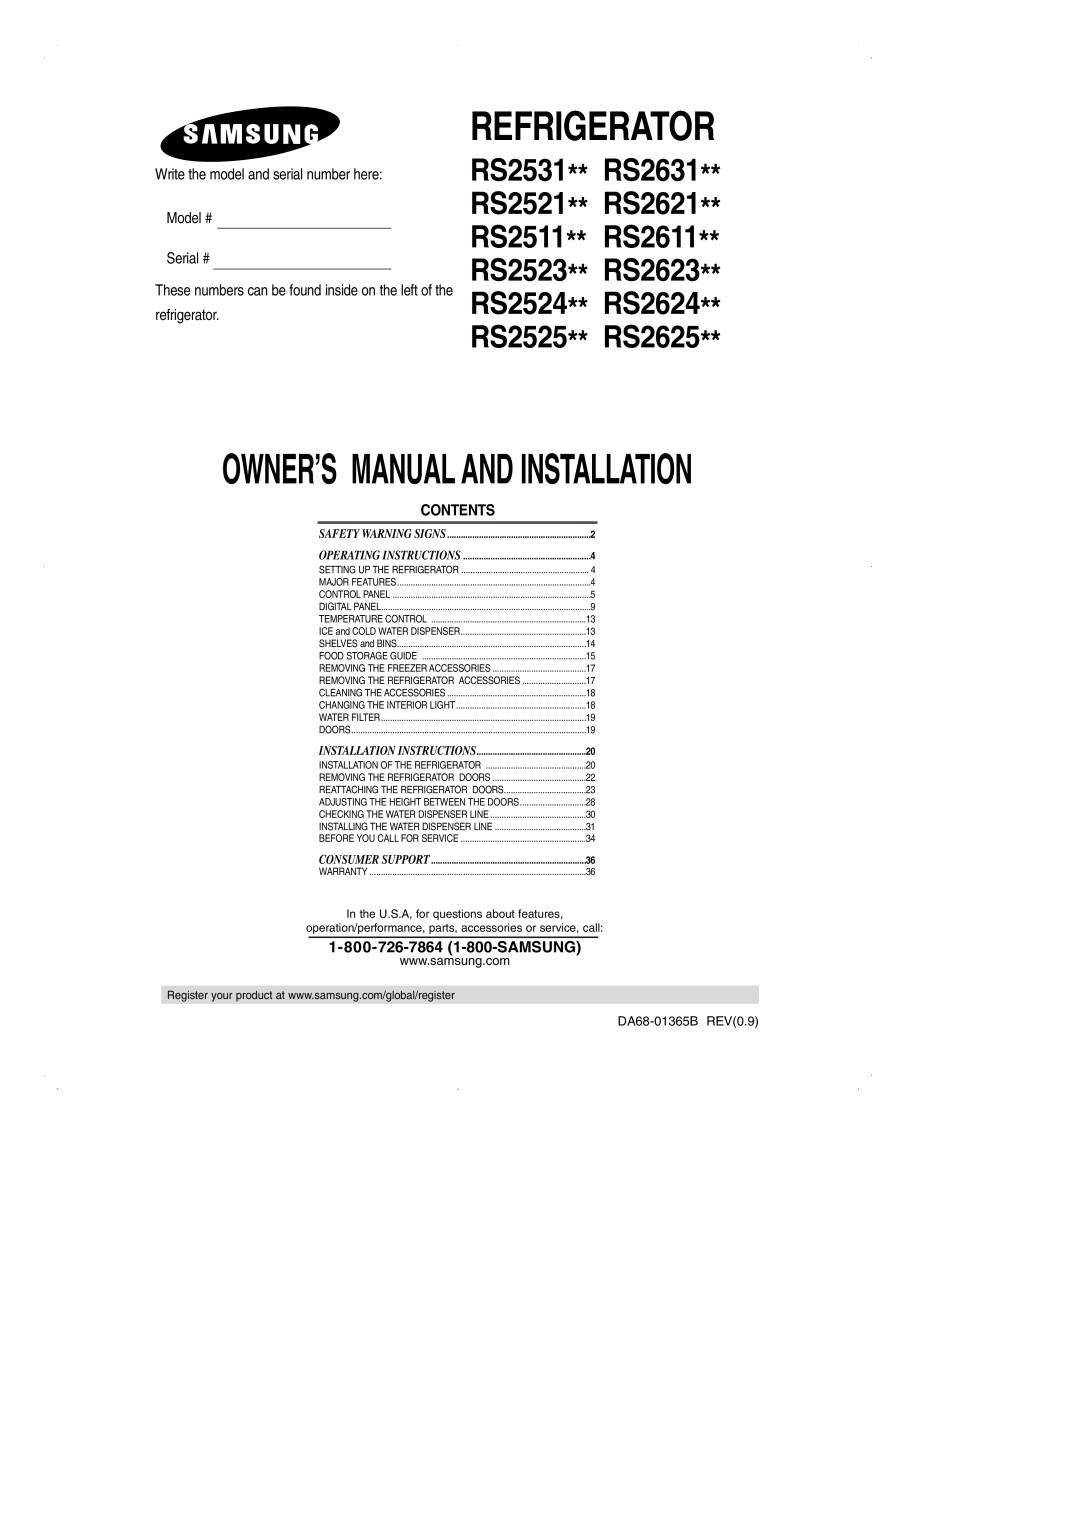 Samsung RS2531 installation instructions Write the model and serial number here Model #, Serial #, Contents, Refrigerator 